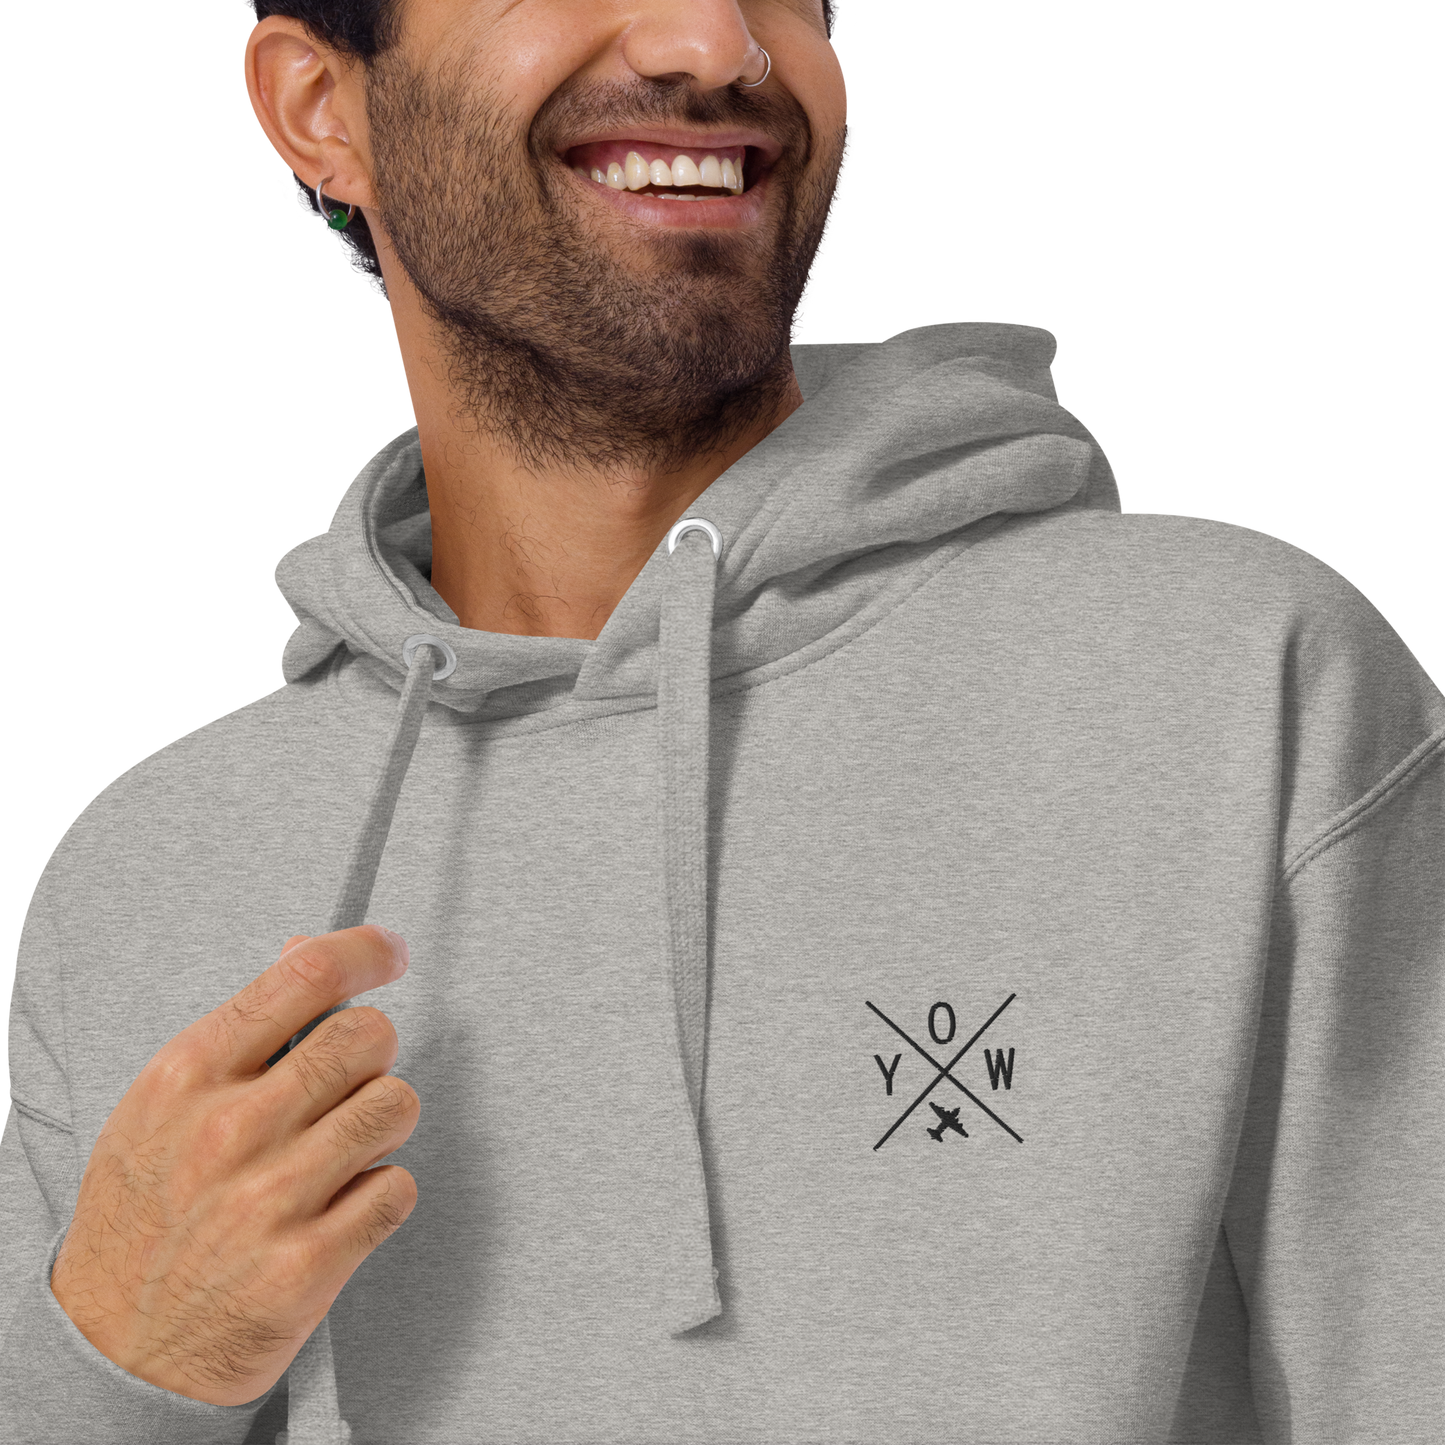 YHM Designs - YOW Ottawa Premium Hoodie - Crossed-X Design with Airport Code and Vintage Propliner - Black Embroidery - Image 15